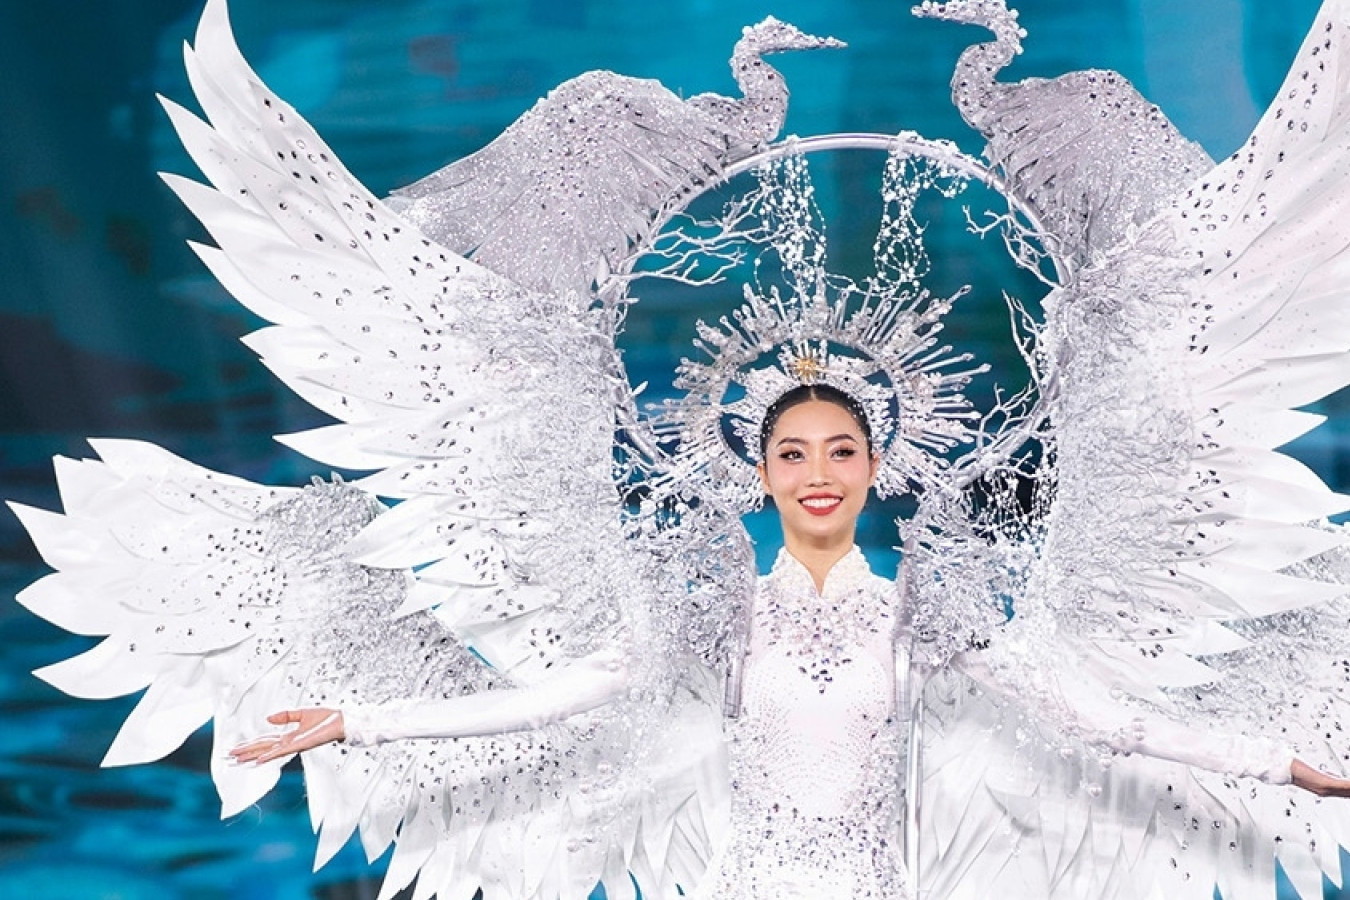 Beauties wow in national costume competition at Miss Grand Vietnam 2023